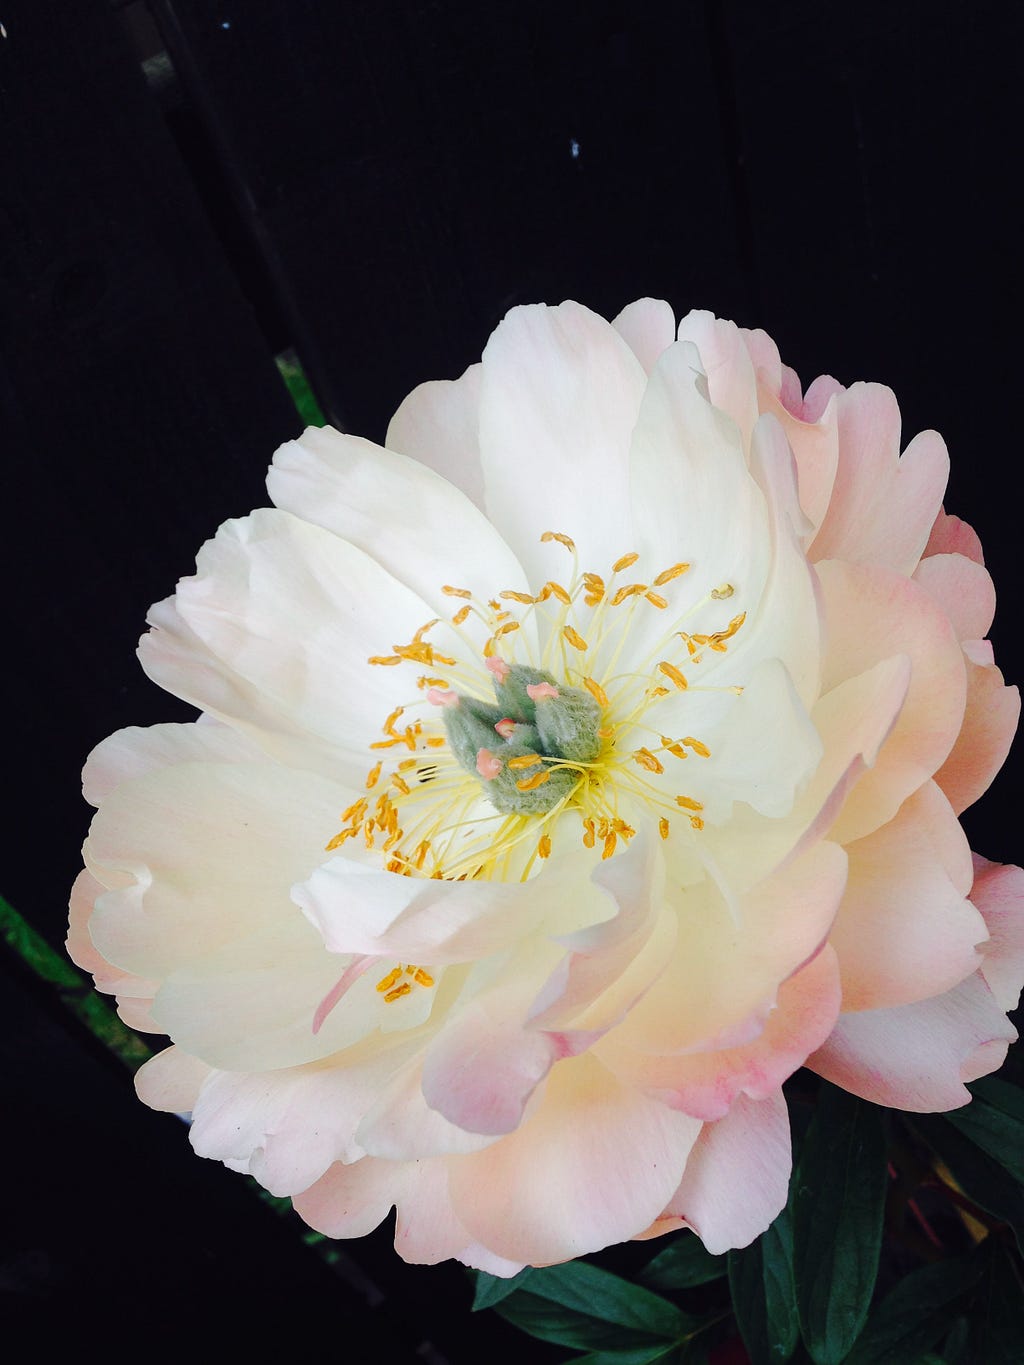 Photo of a peony flower grown by the author.